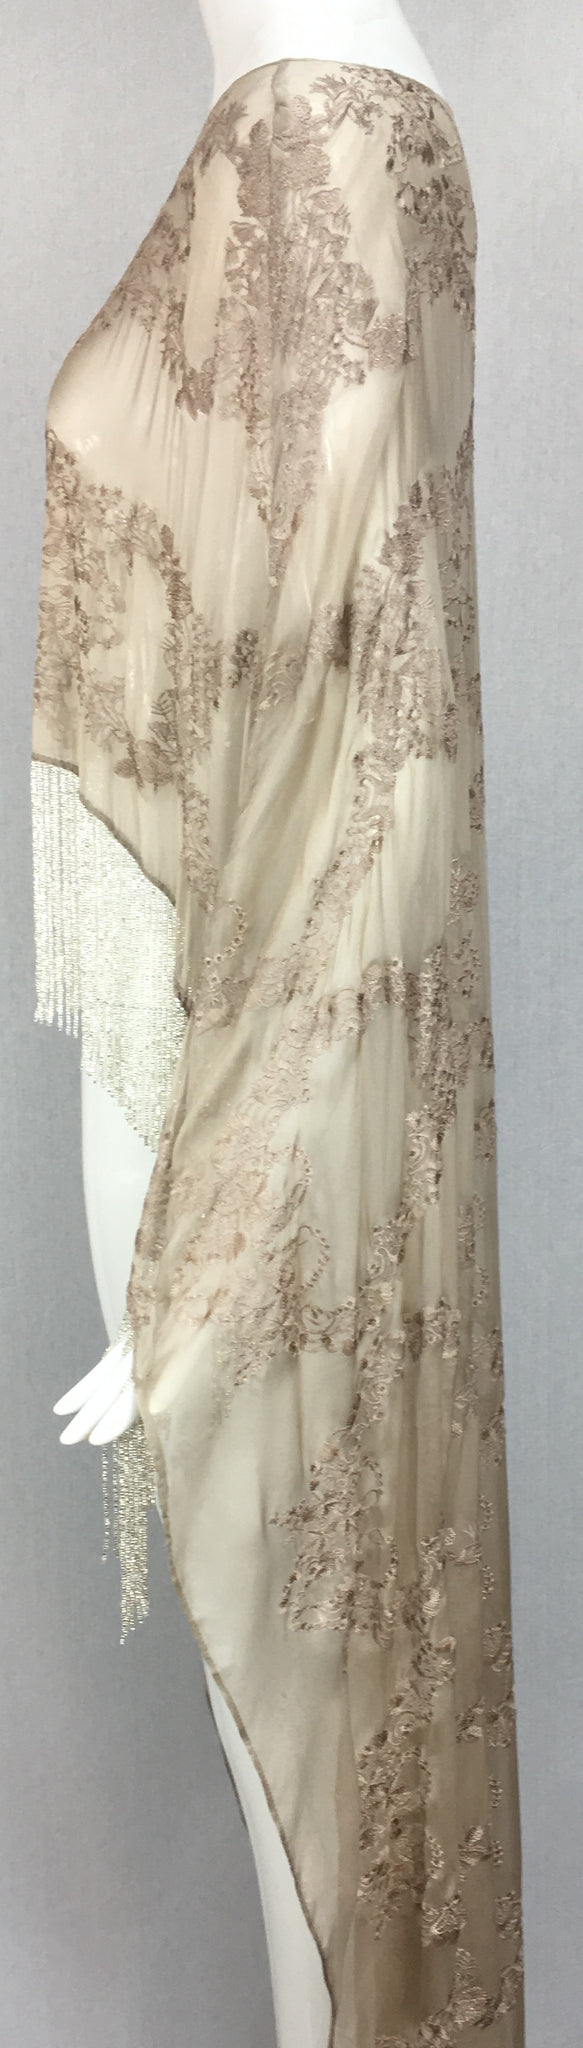 Embroidered Silk Chiffon Cape with Fringe